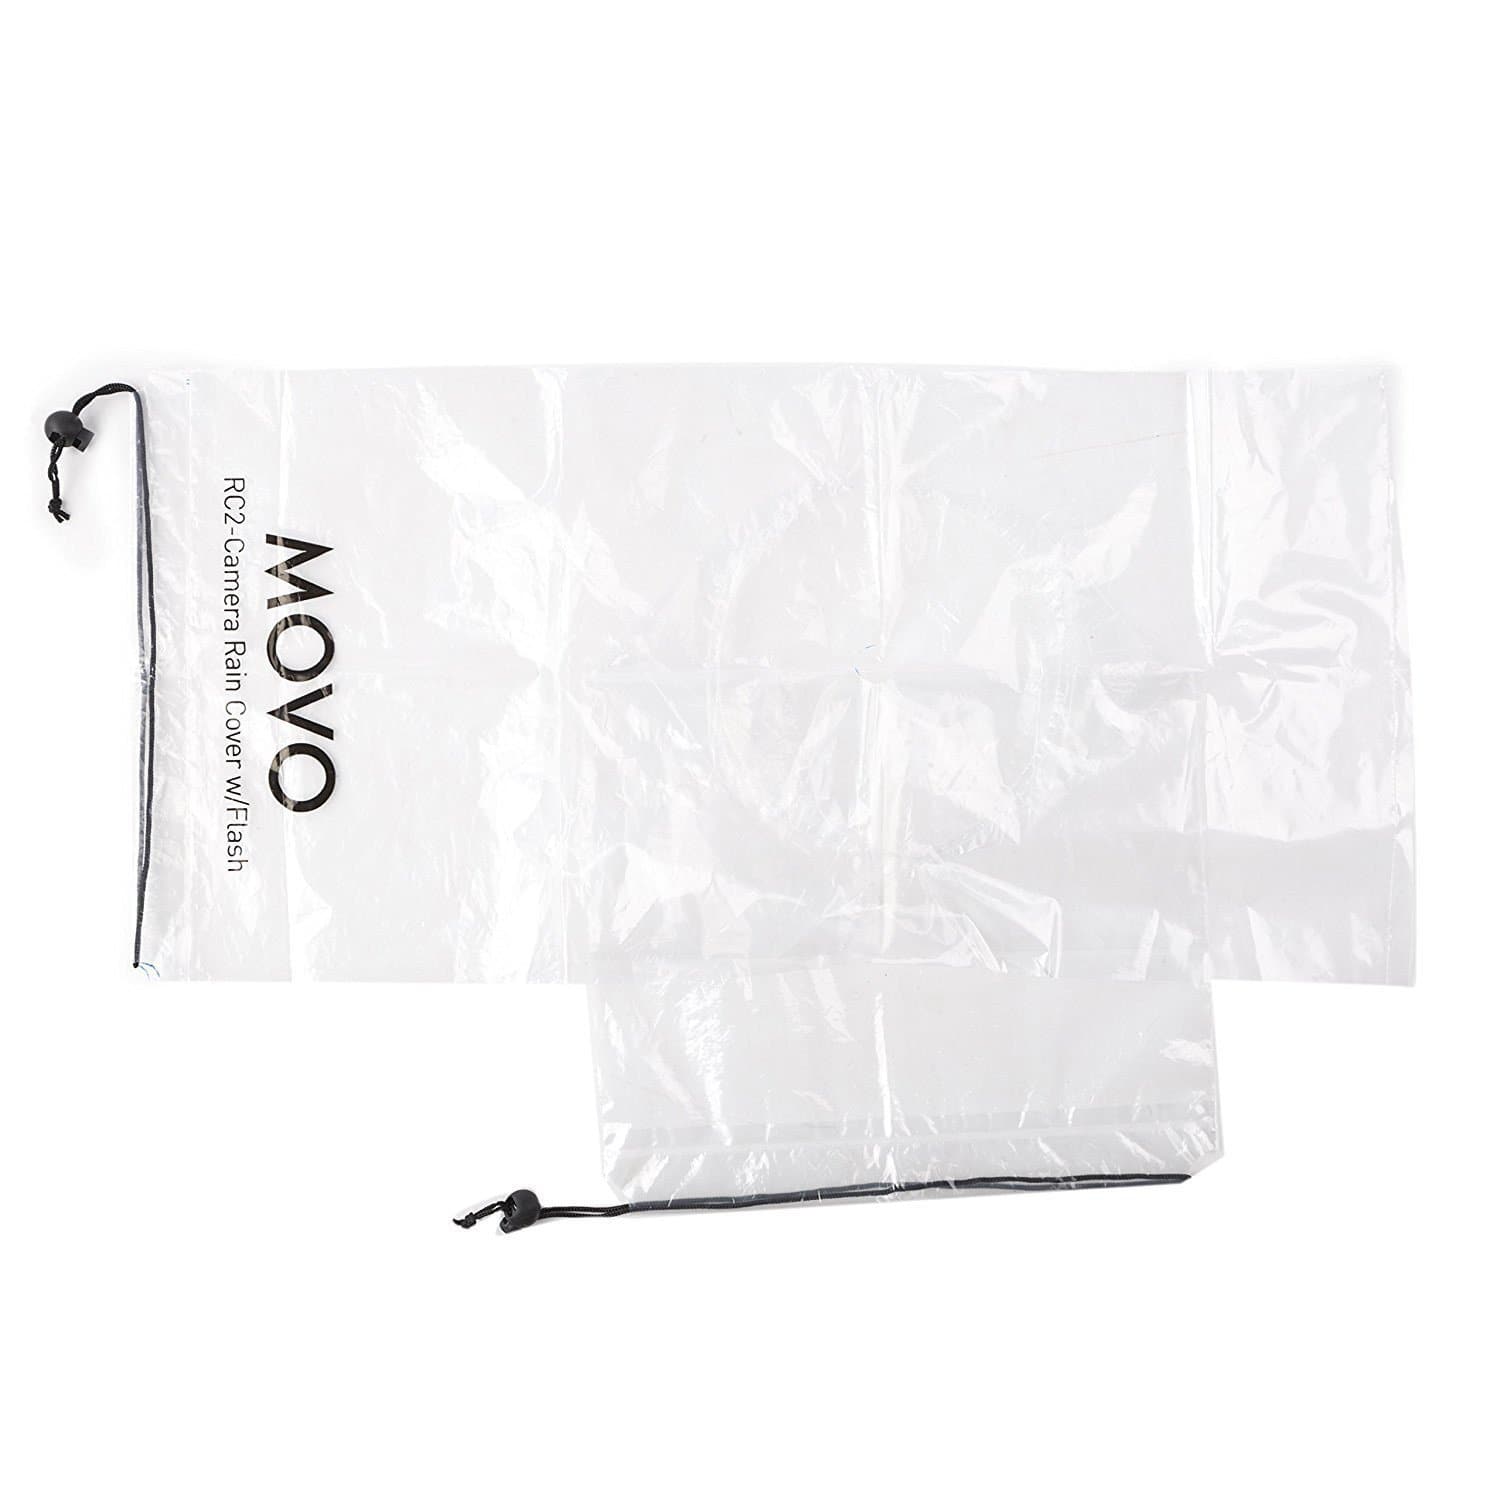 10x Clear Rain Cover for DSLR Camera, Flash, & Lens up to 18" - Movo